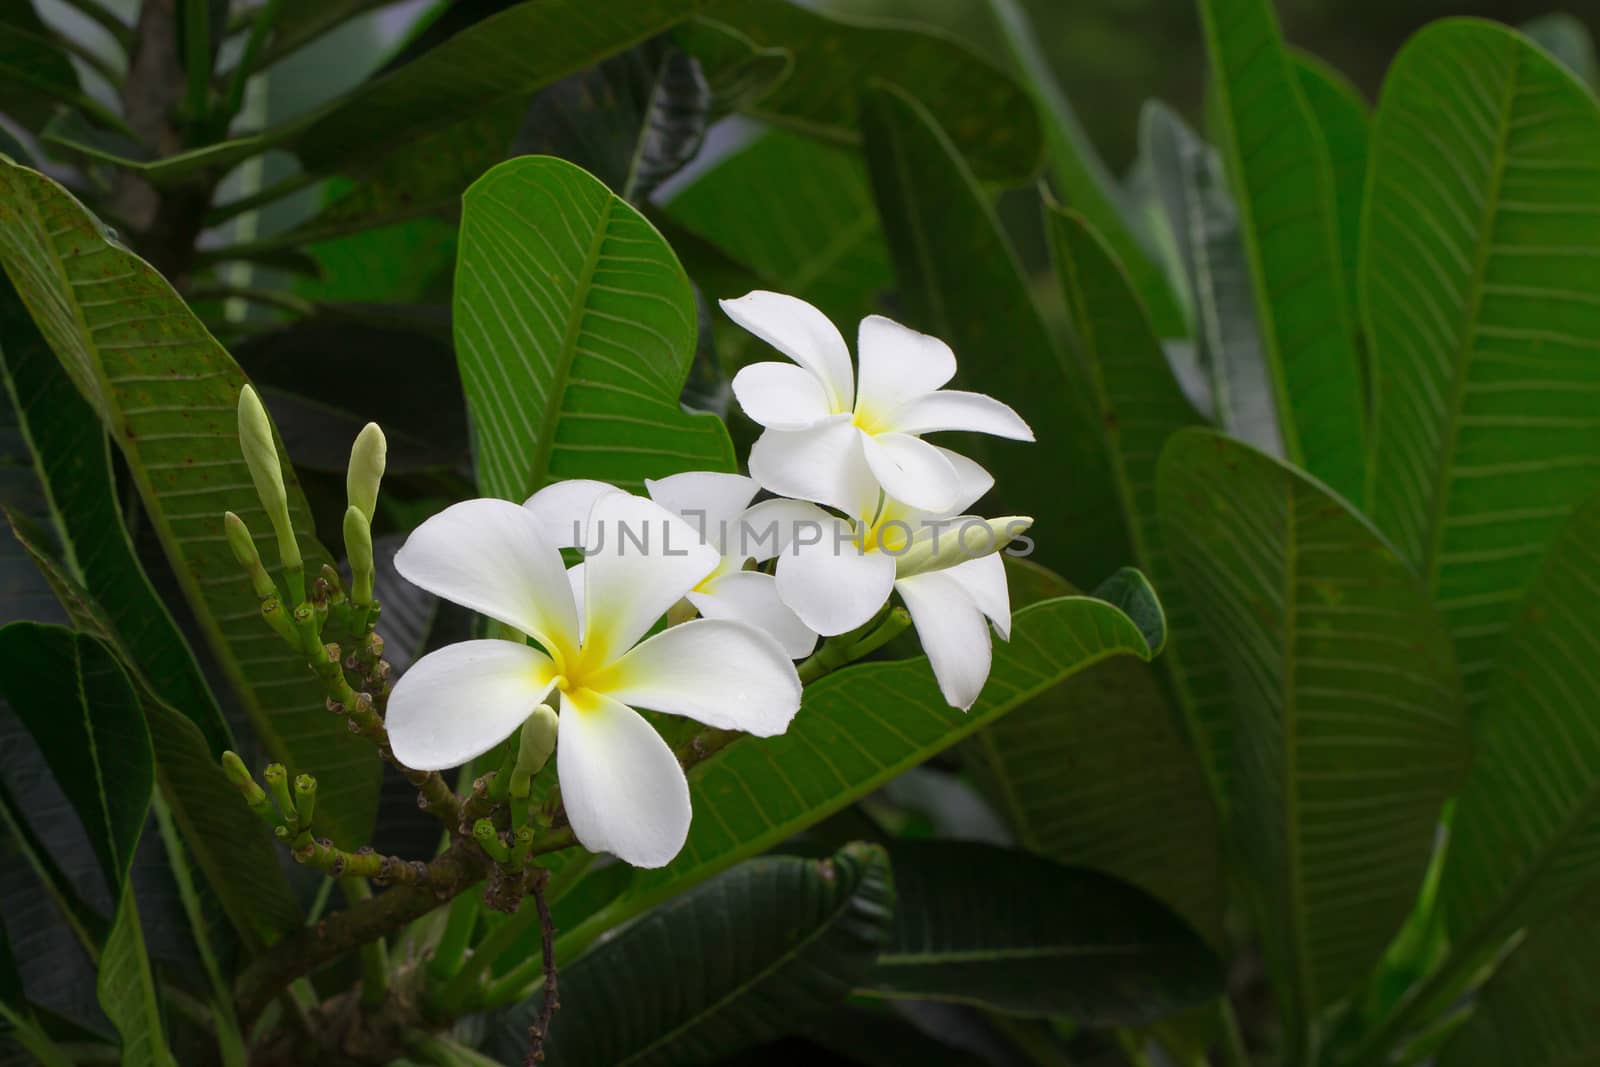 Close up of white and yellow frangipani flowers with green leaves in background.